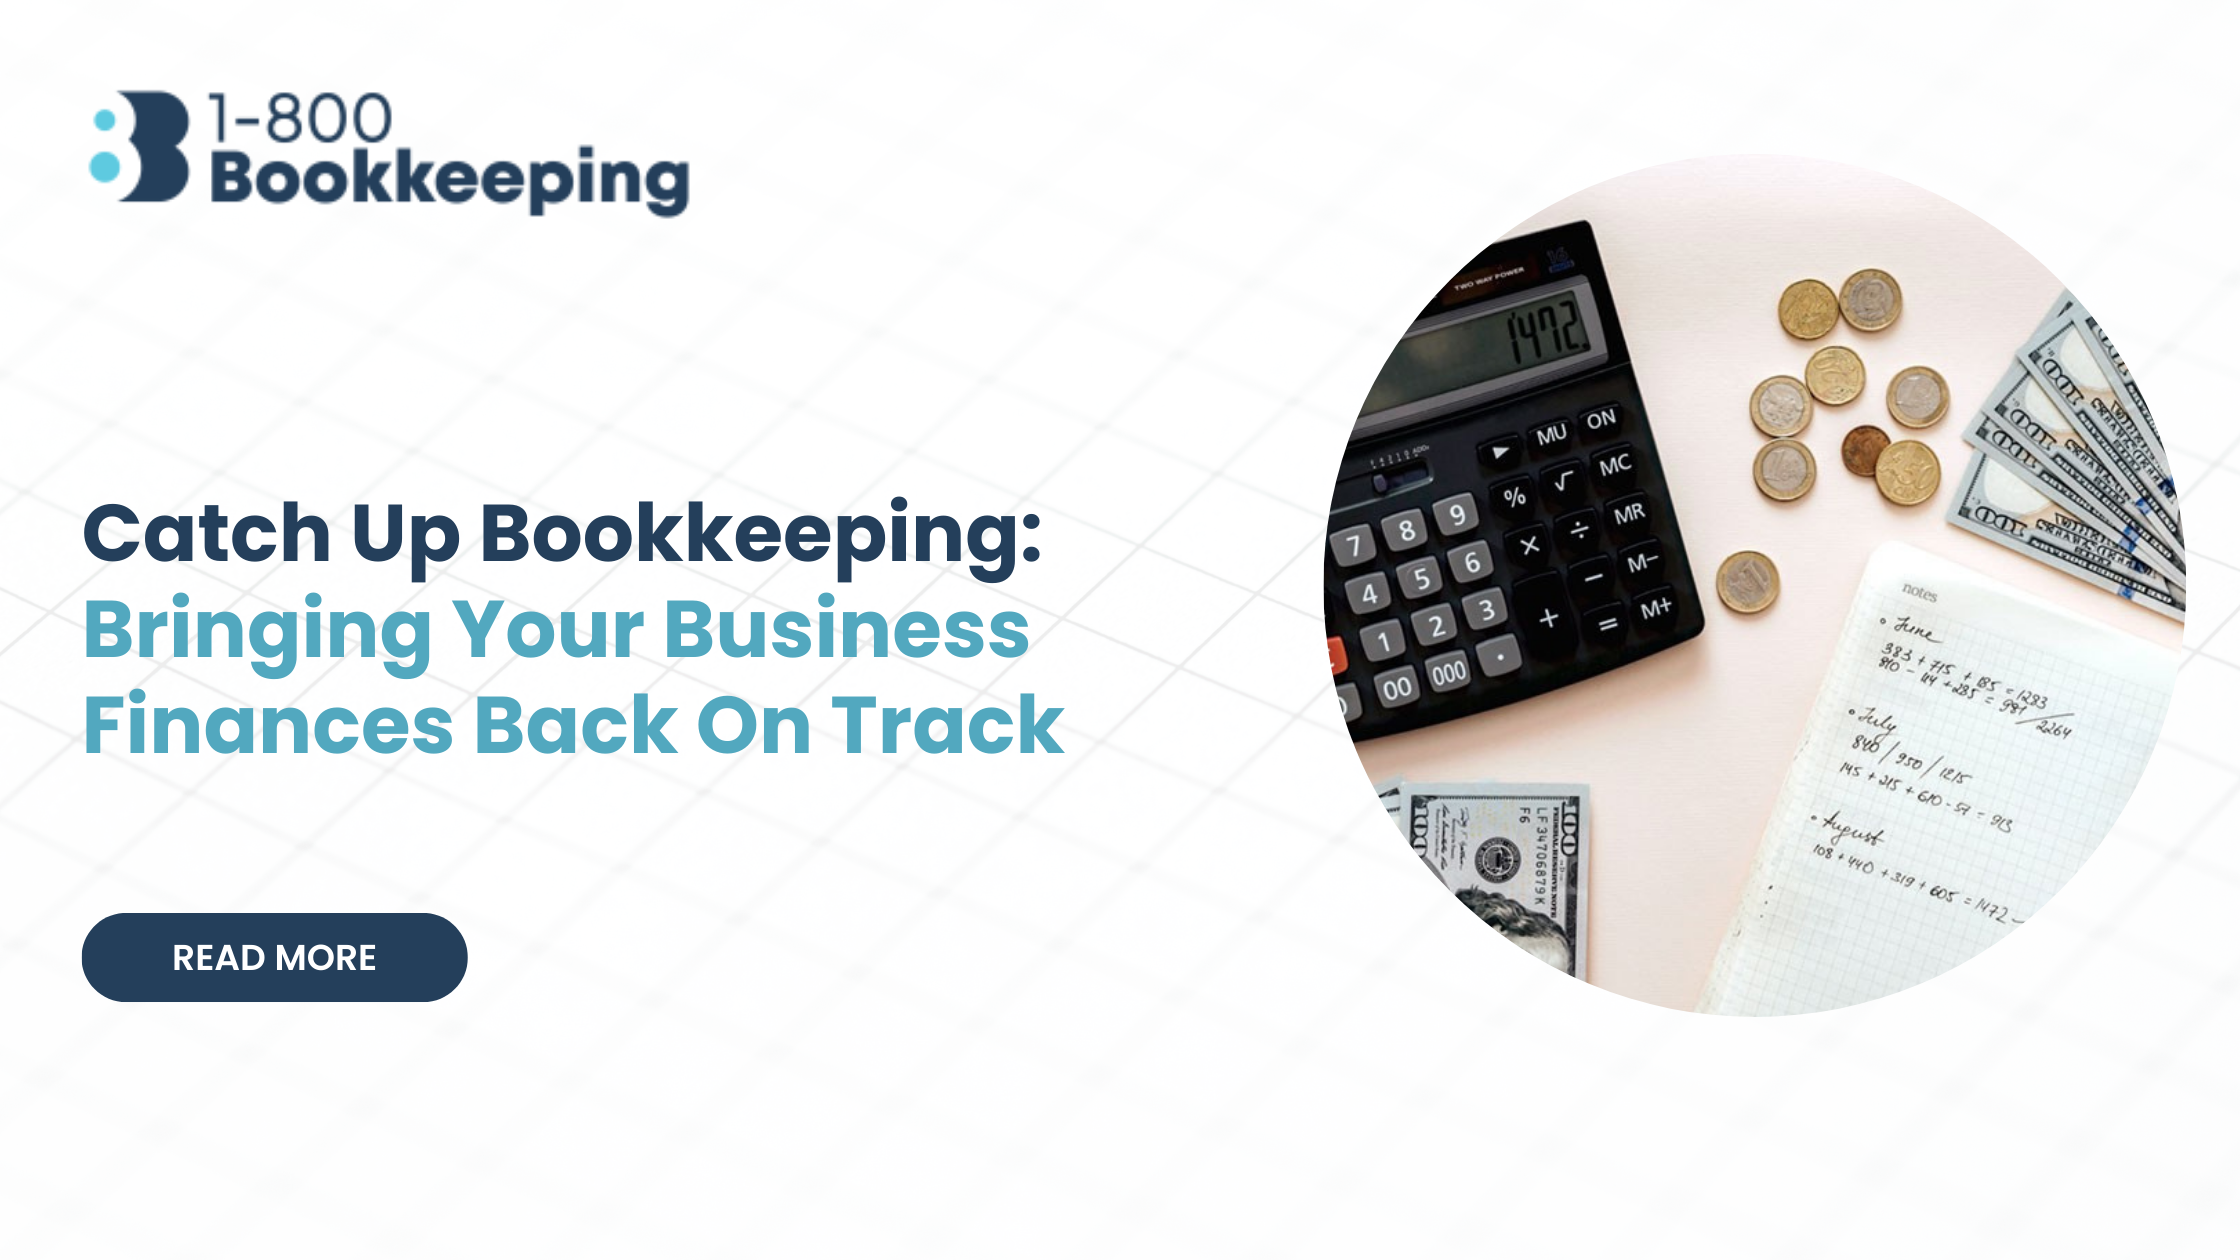 Catch Up Bookkeeping: Bringing Your Business Finances Back on Track